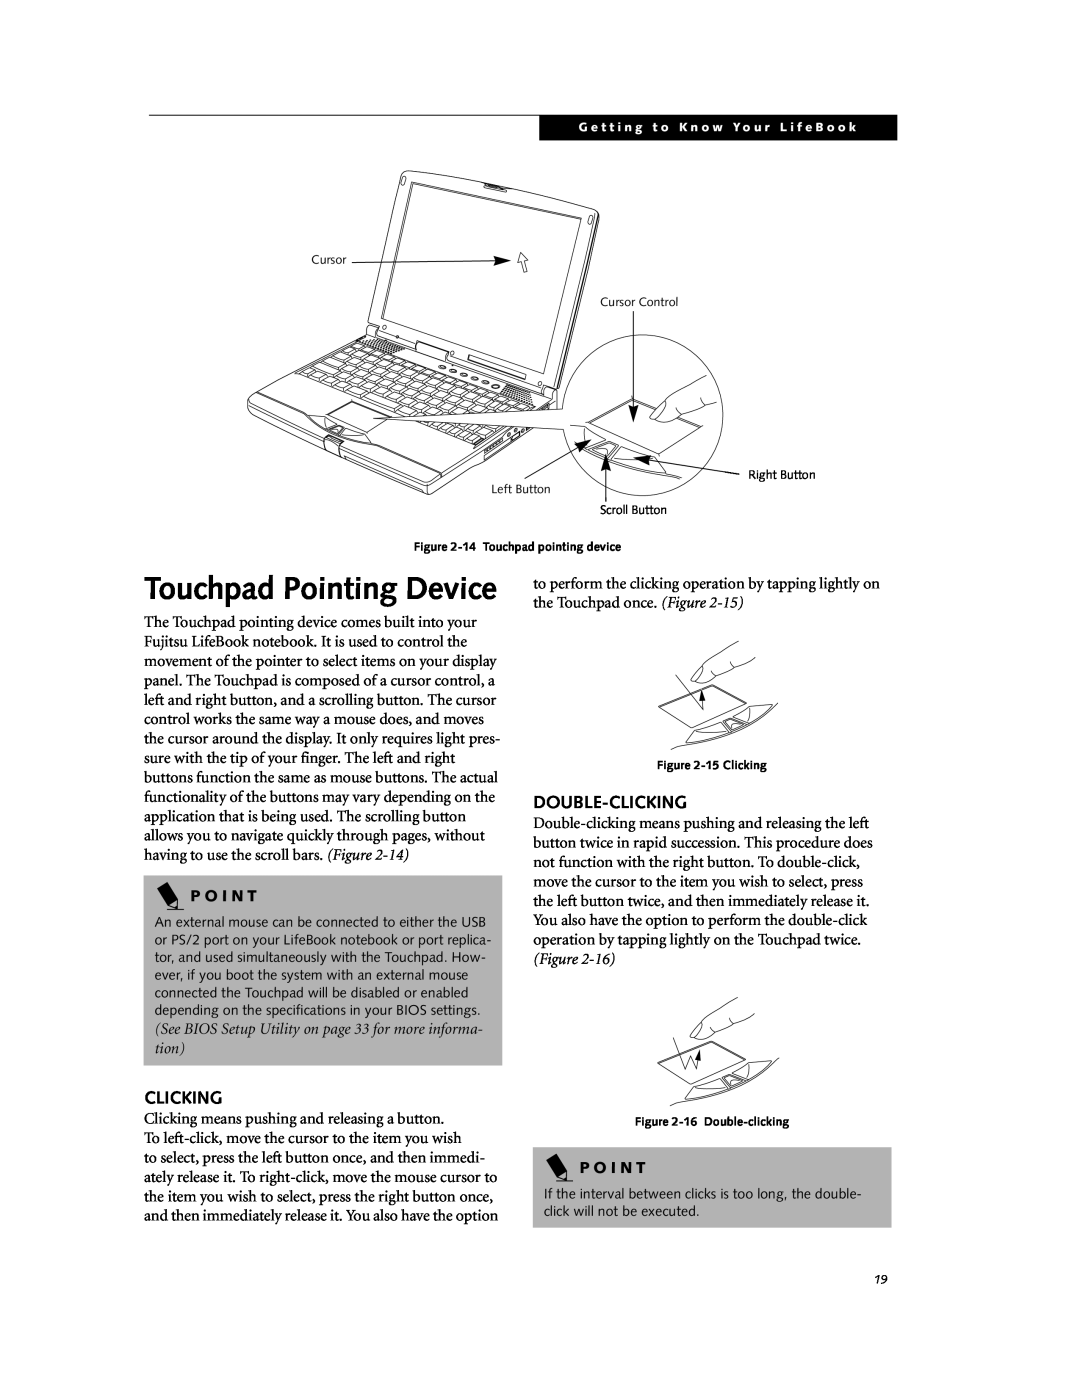 Fujitsu DVD Player manual Touchpad Pointing Device, Double-Clicking, P O I N T 